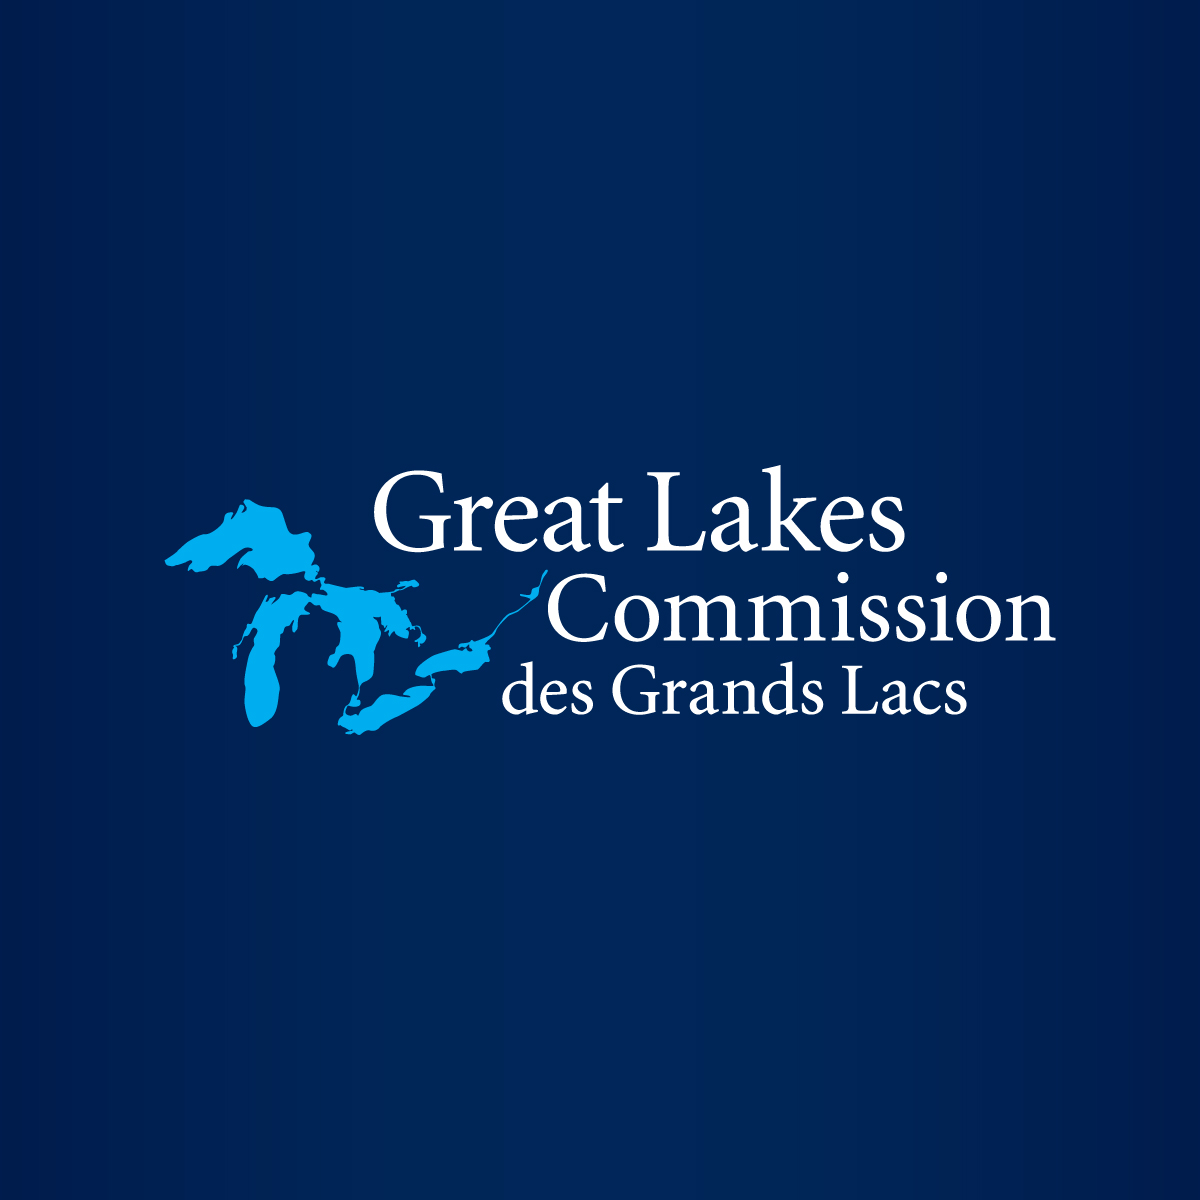 study great lakes have moderate to high potential for risk